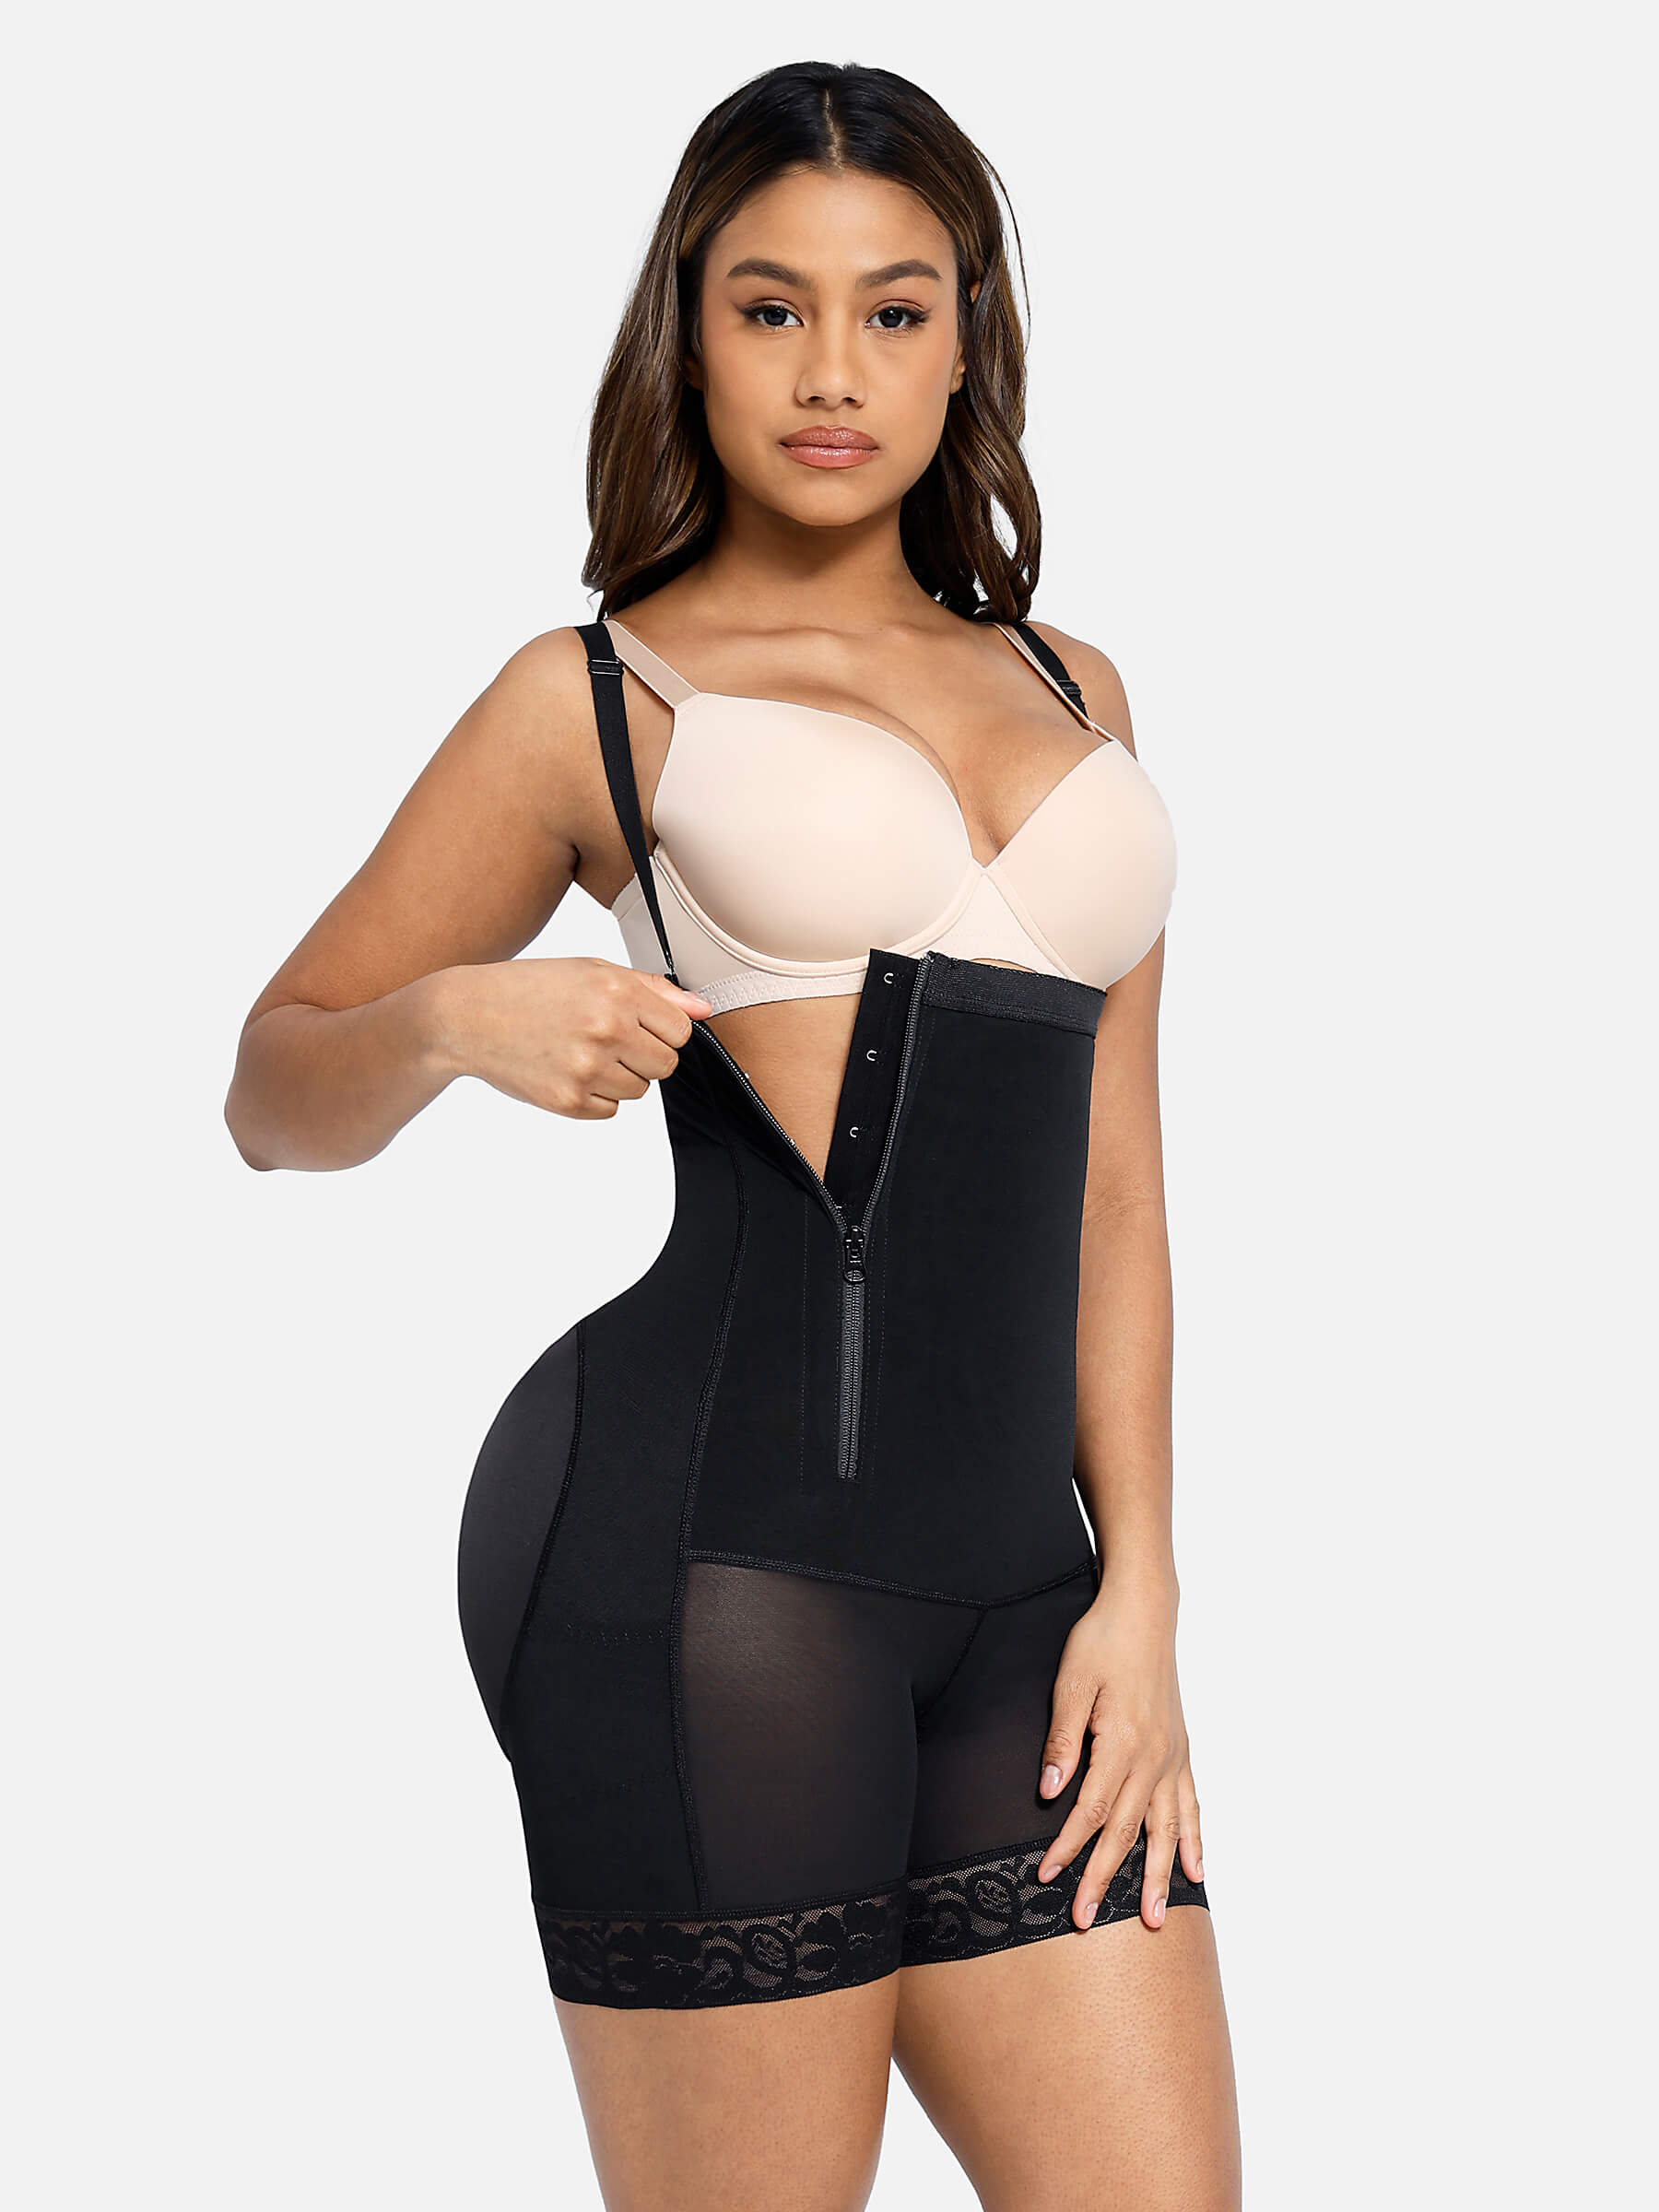 FeelinGirl 2018 Sexy Underbust Bodysuit With Waist Trainer, Butt Lifter,  And Power Slimming Braless Seamless Full Body Shaper From Waxeer, $52.52